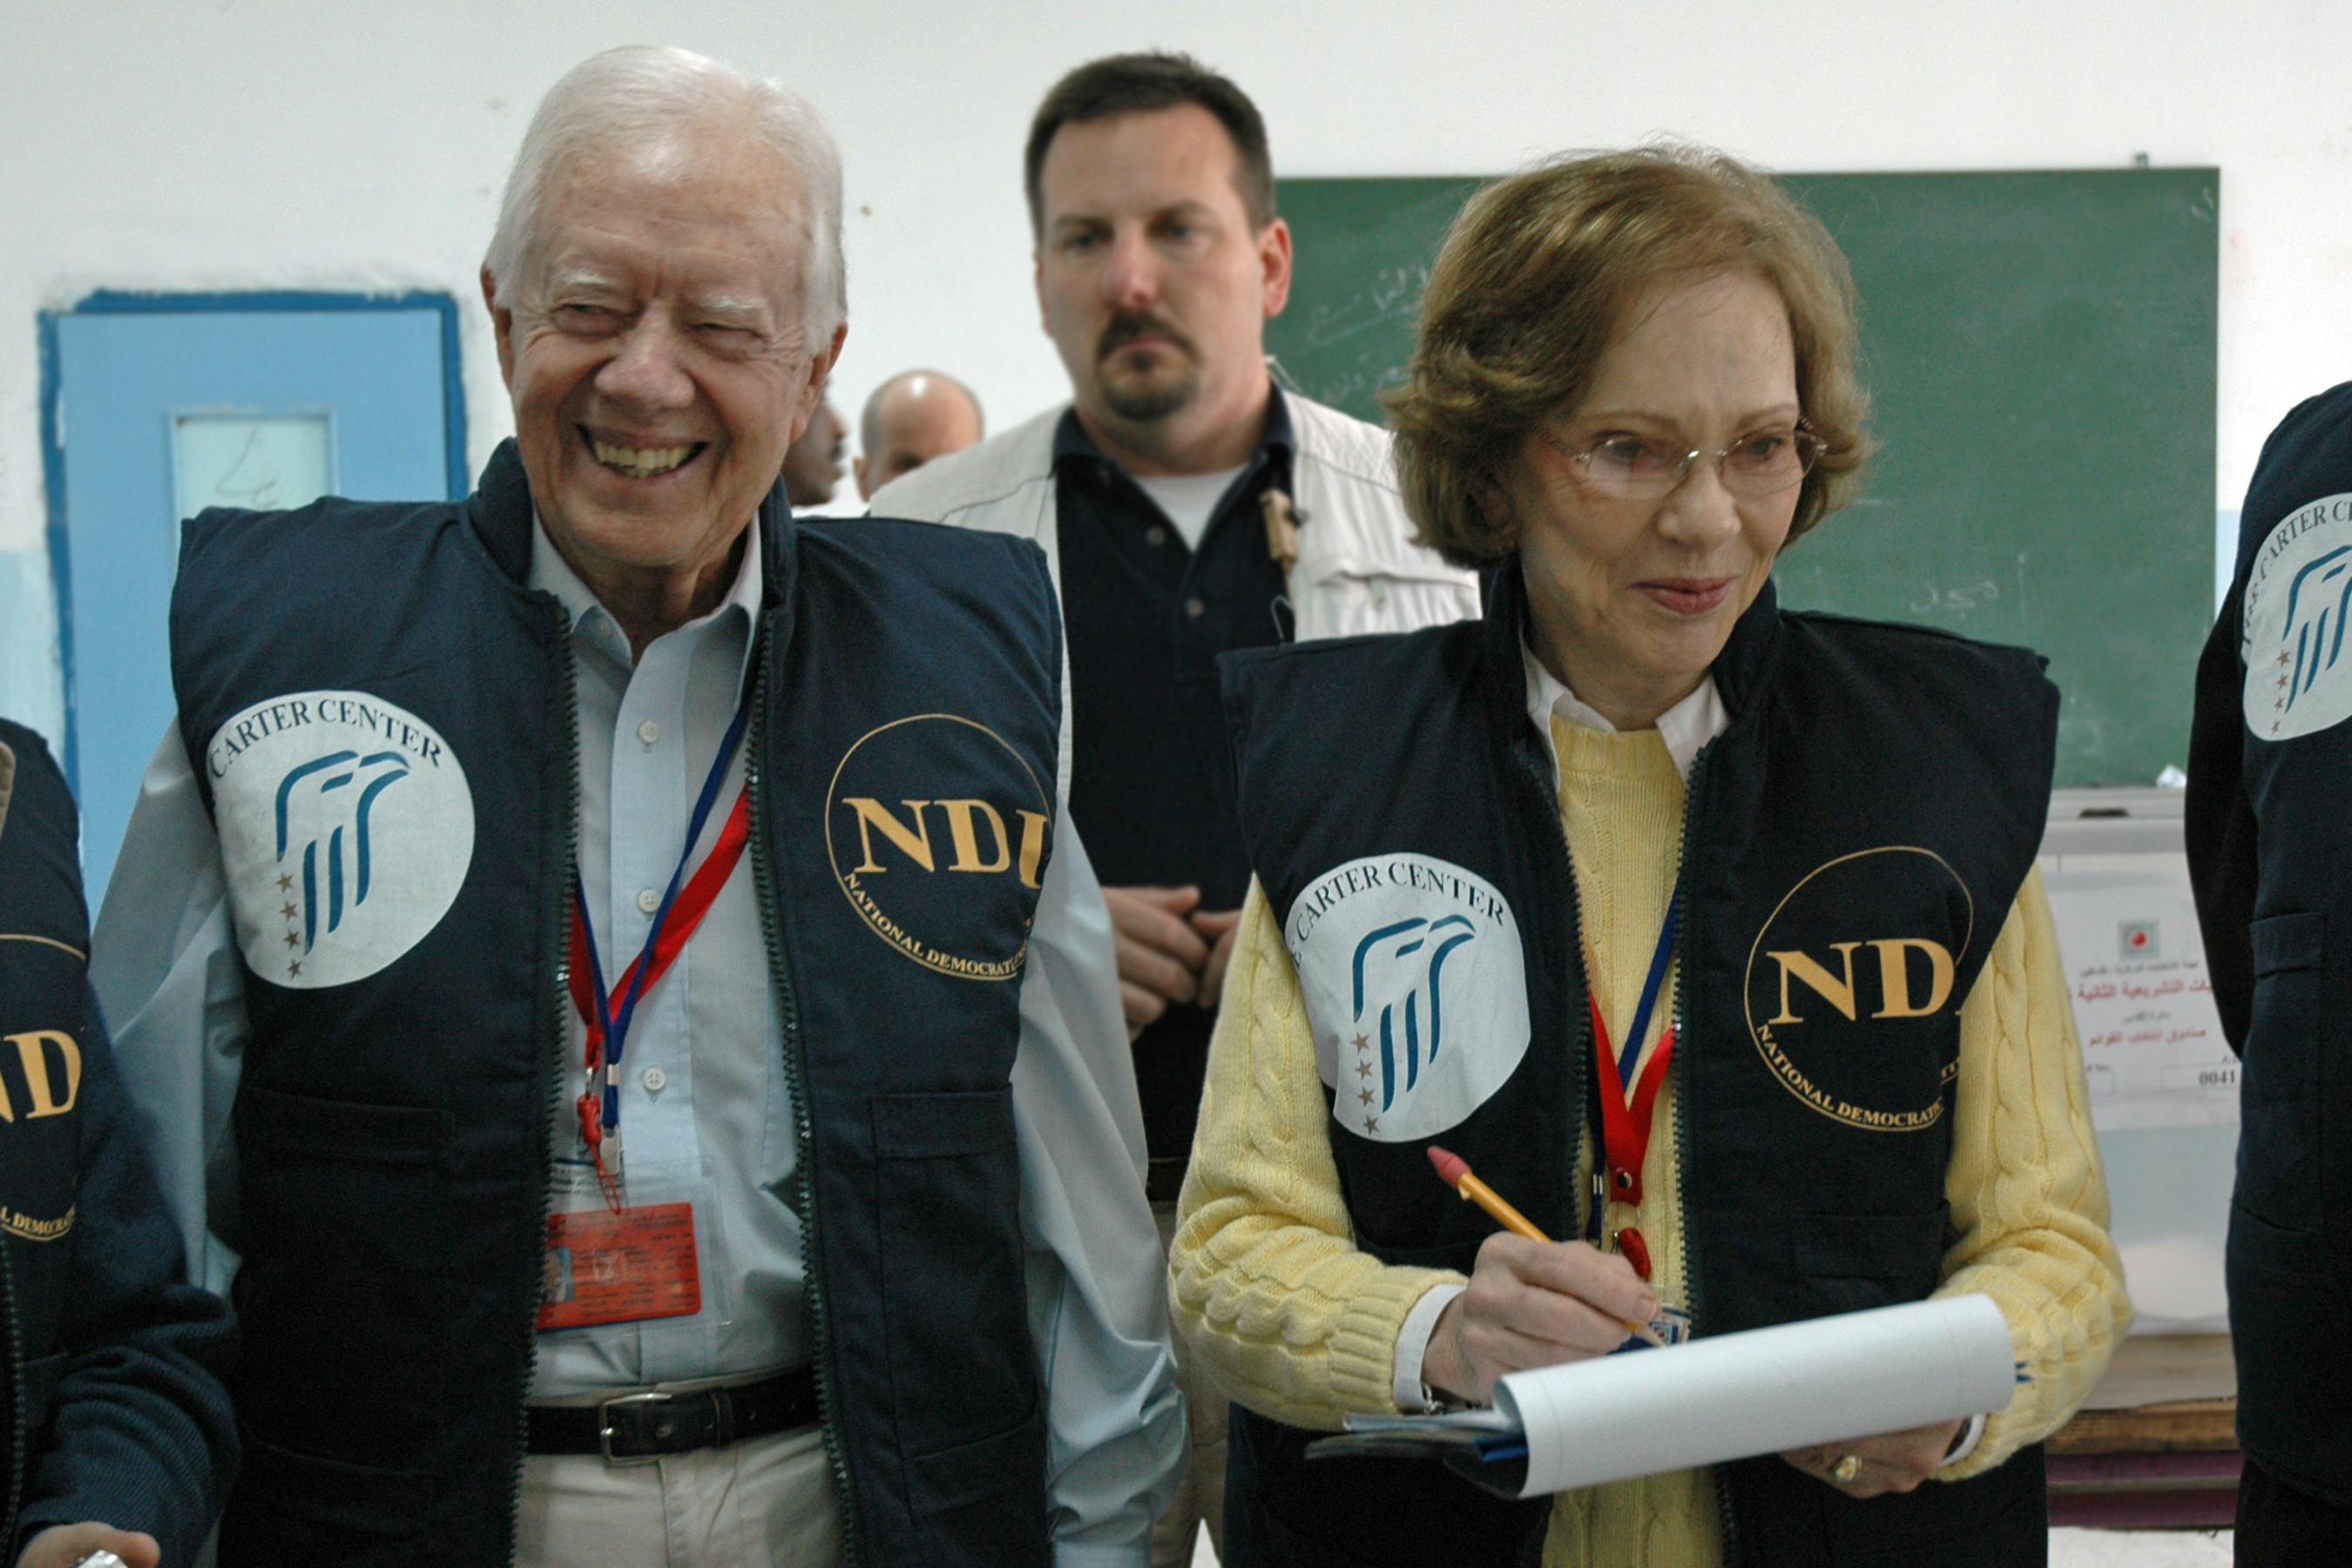 Jimmy and Rosalynn Carter observe the 2006 Palestinian parliamentary elections as part of an 80-member delegation, organized by The Carter Center and the National Democratic Institute. The delegation included elected officials, electoral and human rights experts, regional specialists, and political and civic leaders from North America, the Middle East, Europe, Africa, and Asia.

The Carters are the 2017 recipients of the Ivan Allen Jr. Prize for Social Courage. They are being honored for their partnership a